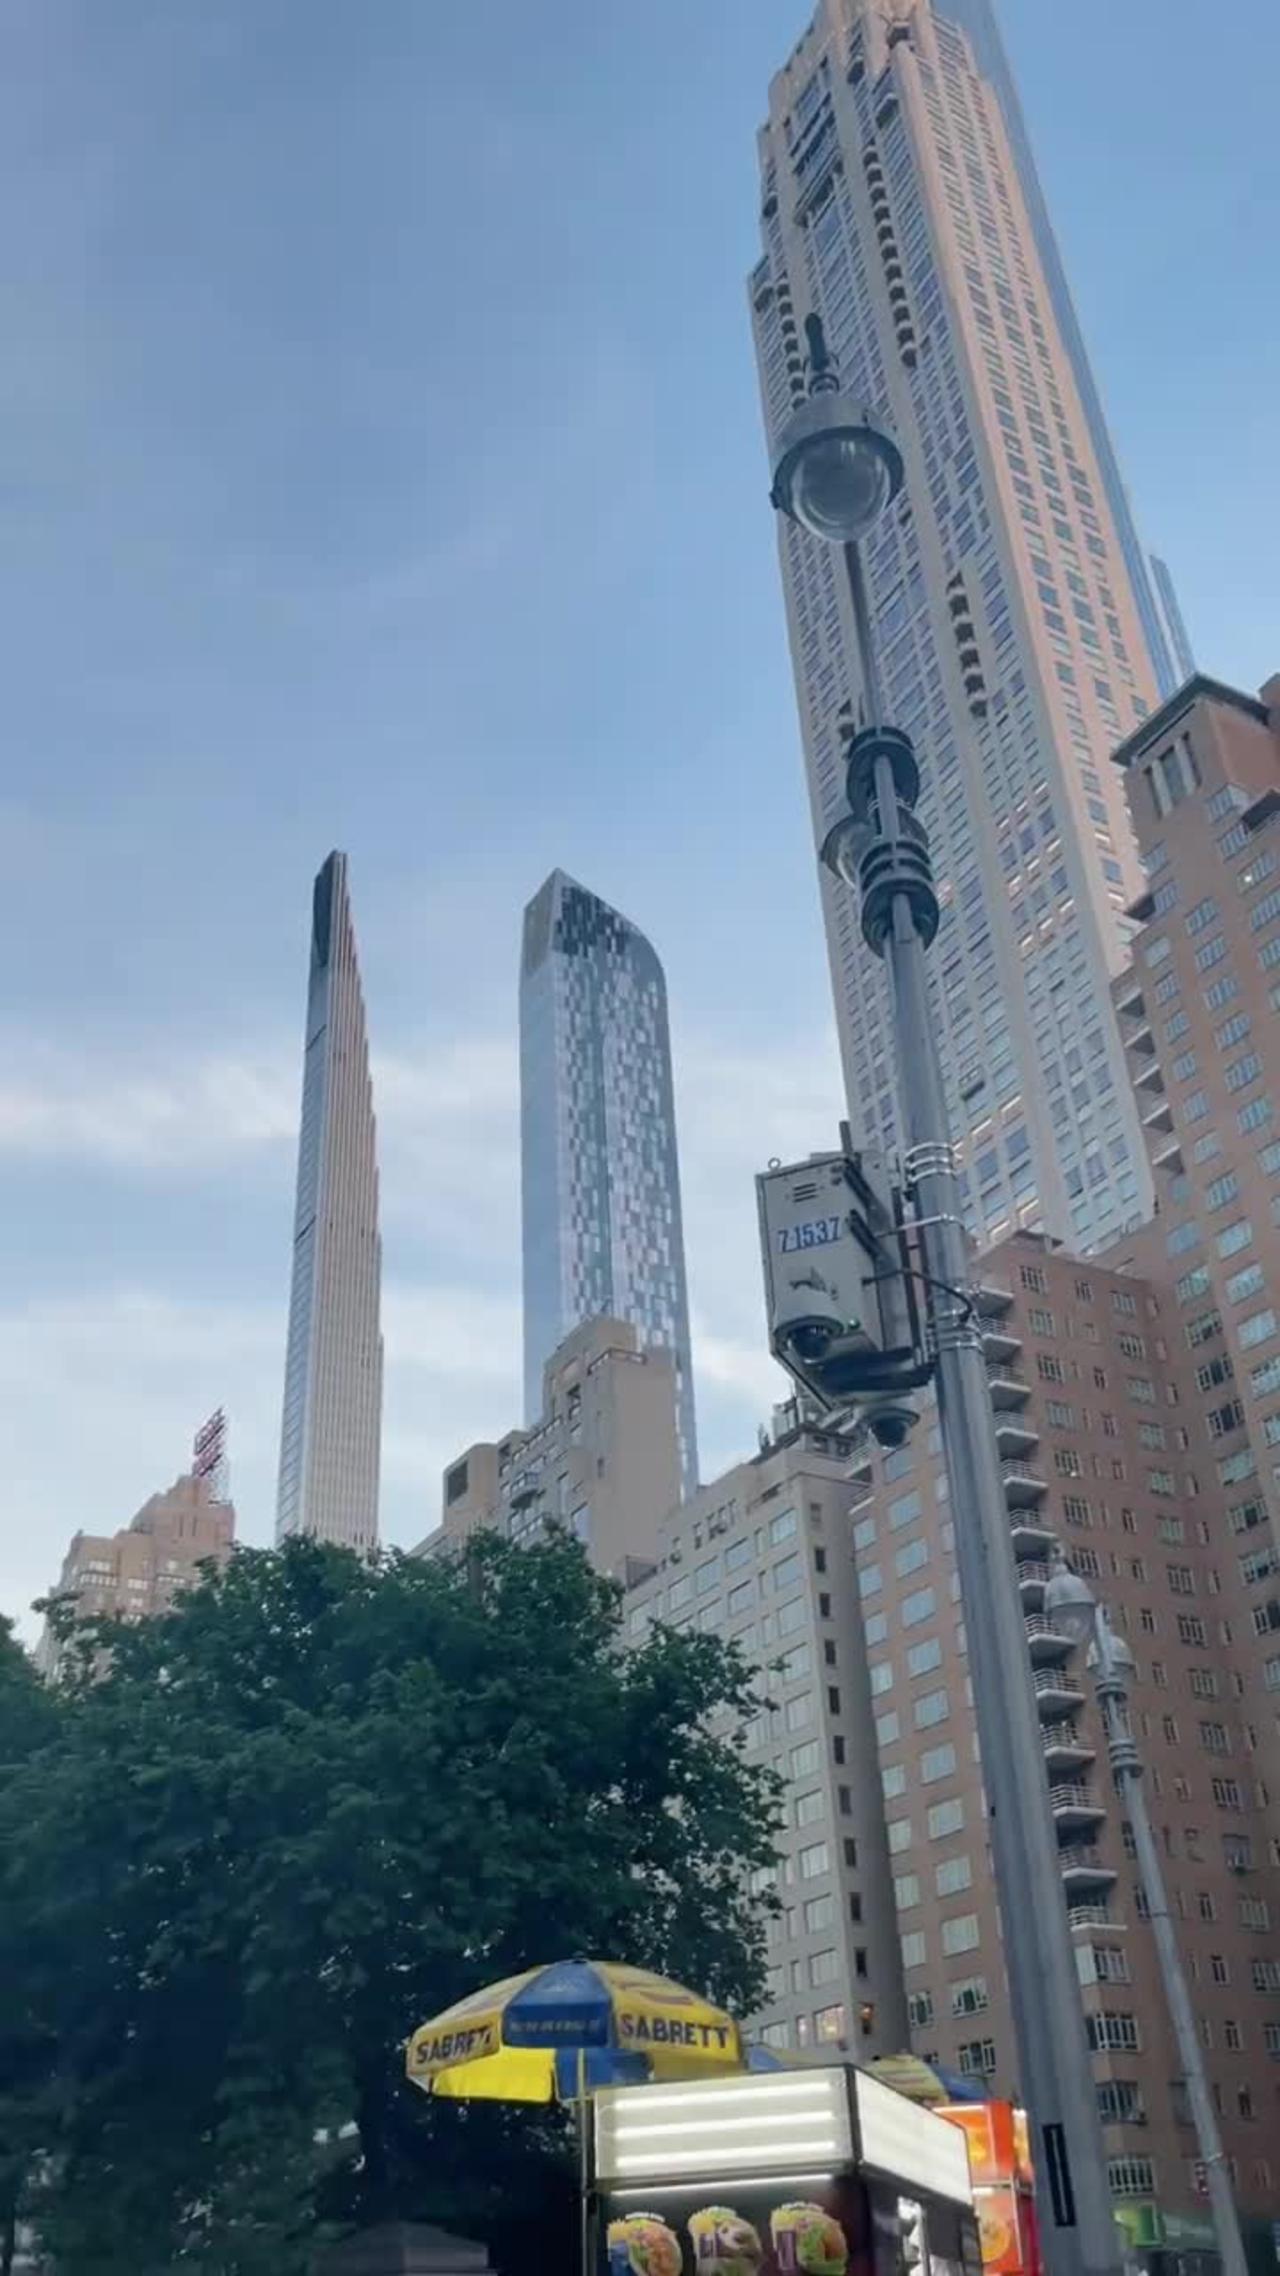 The buildings here are so tall